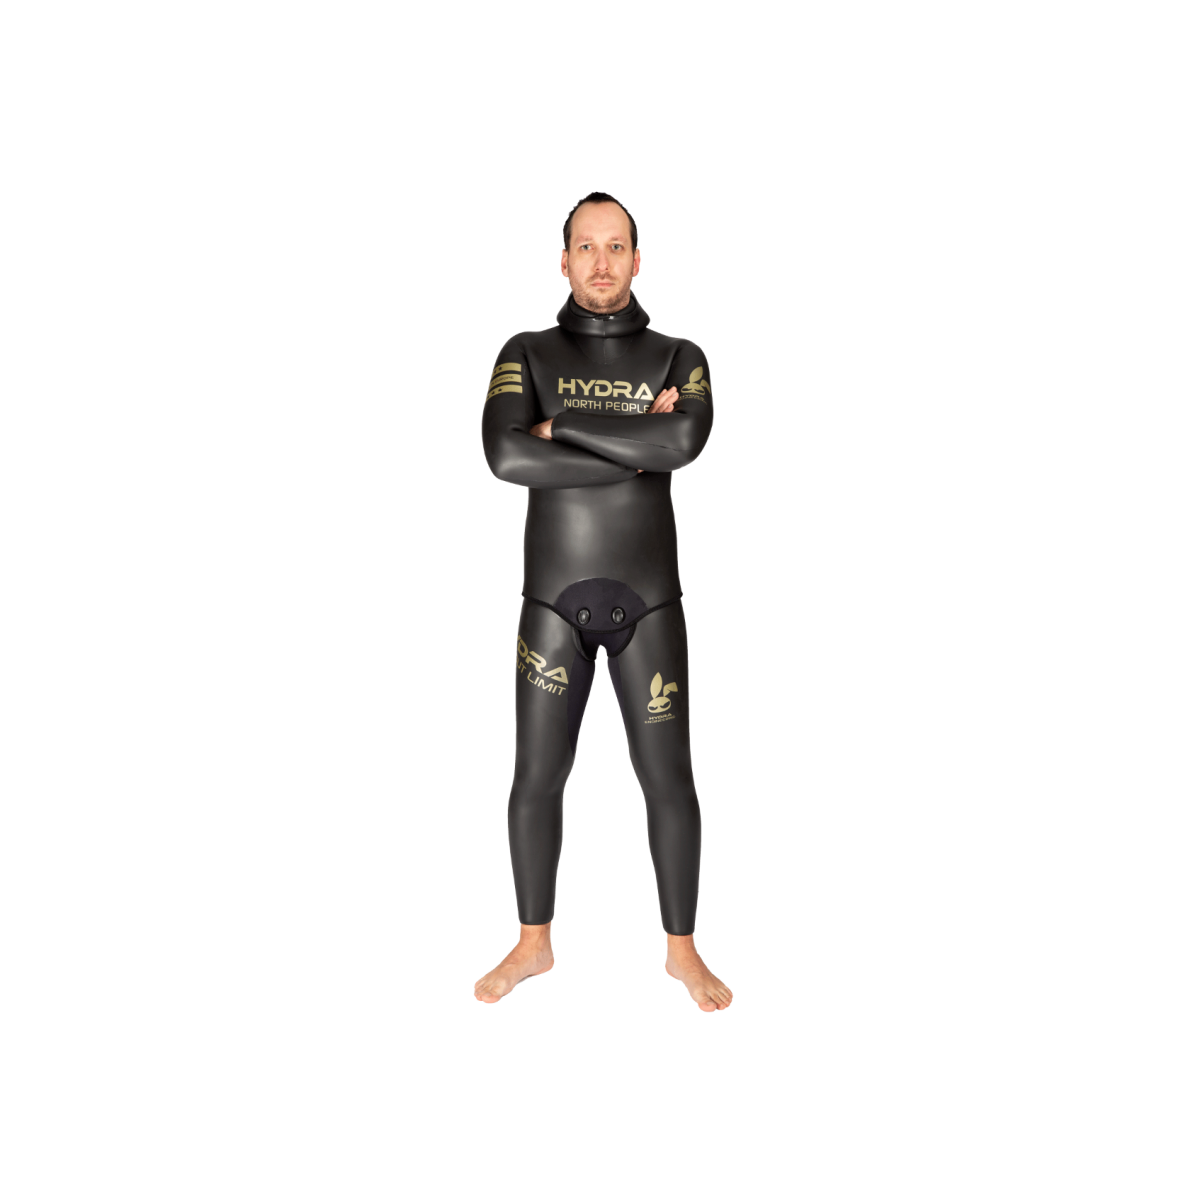 HYDRA NORTH PEOPLE SMOOTHSKIN ULTIMATE SPEARFISHING WETSUIT